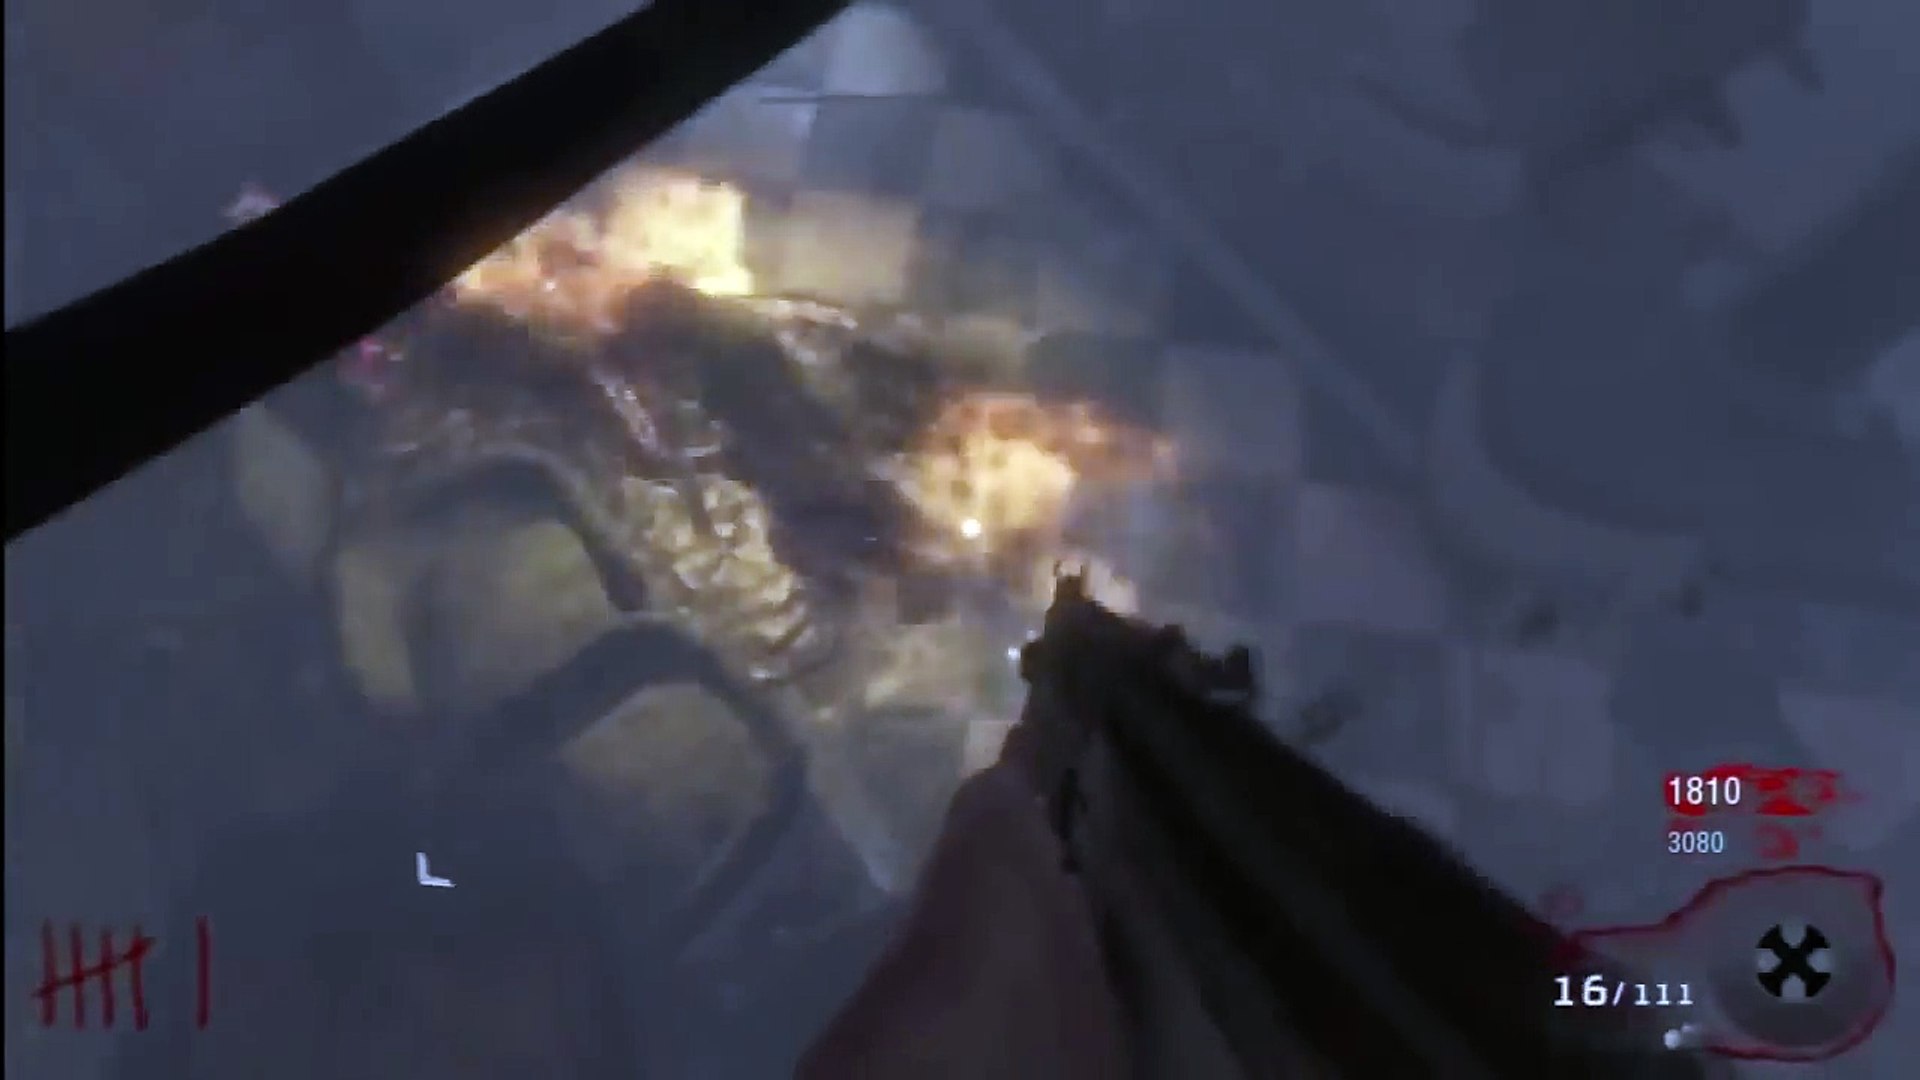 Every Black Ops Zombie Glitches Kino Der Toten Not Patched 05 03 12 Zombies Video Dailymotion